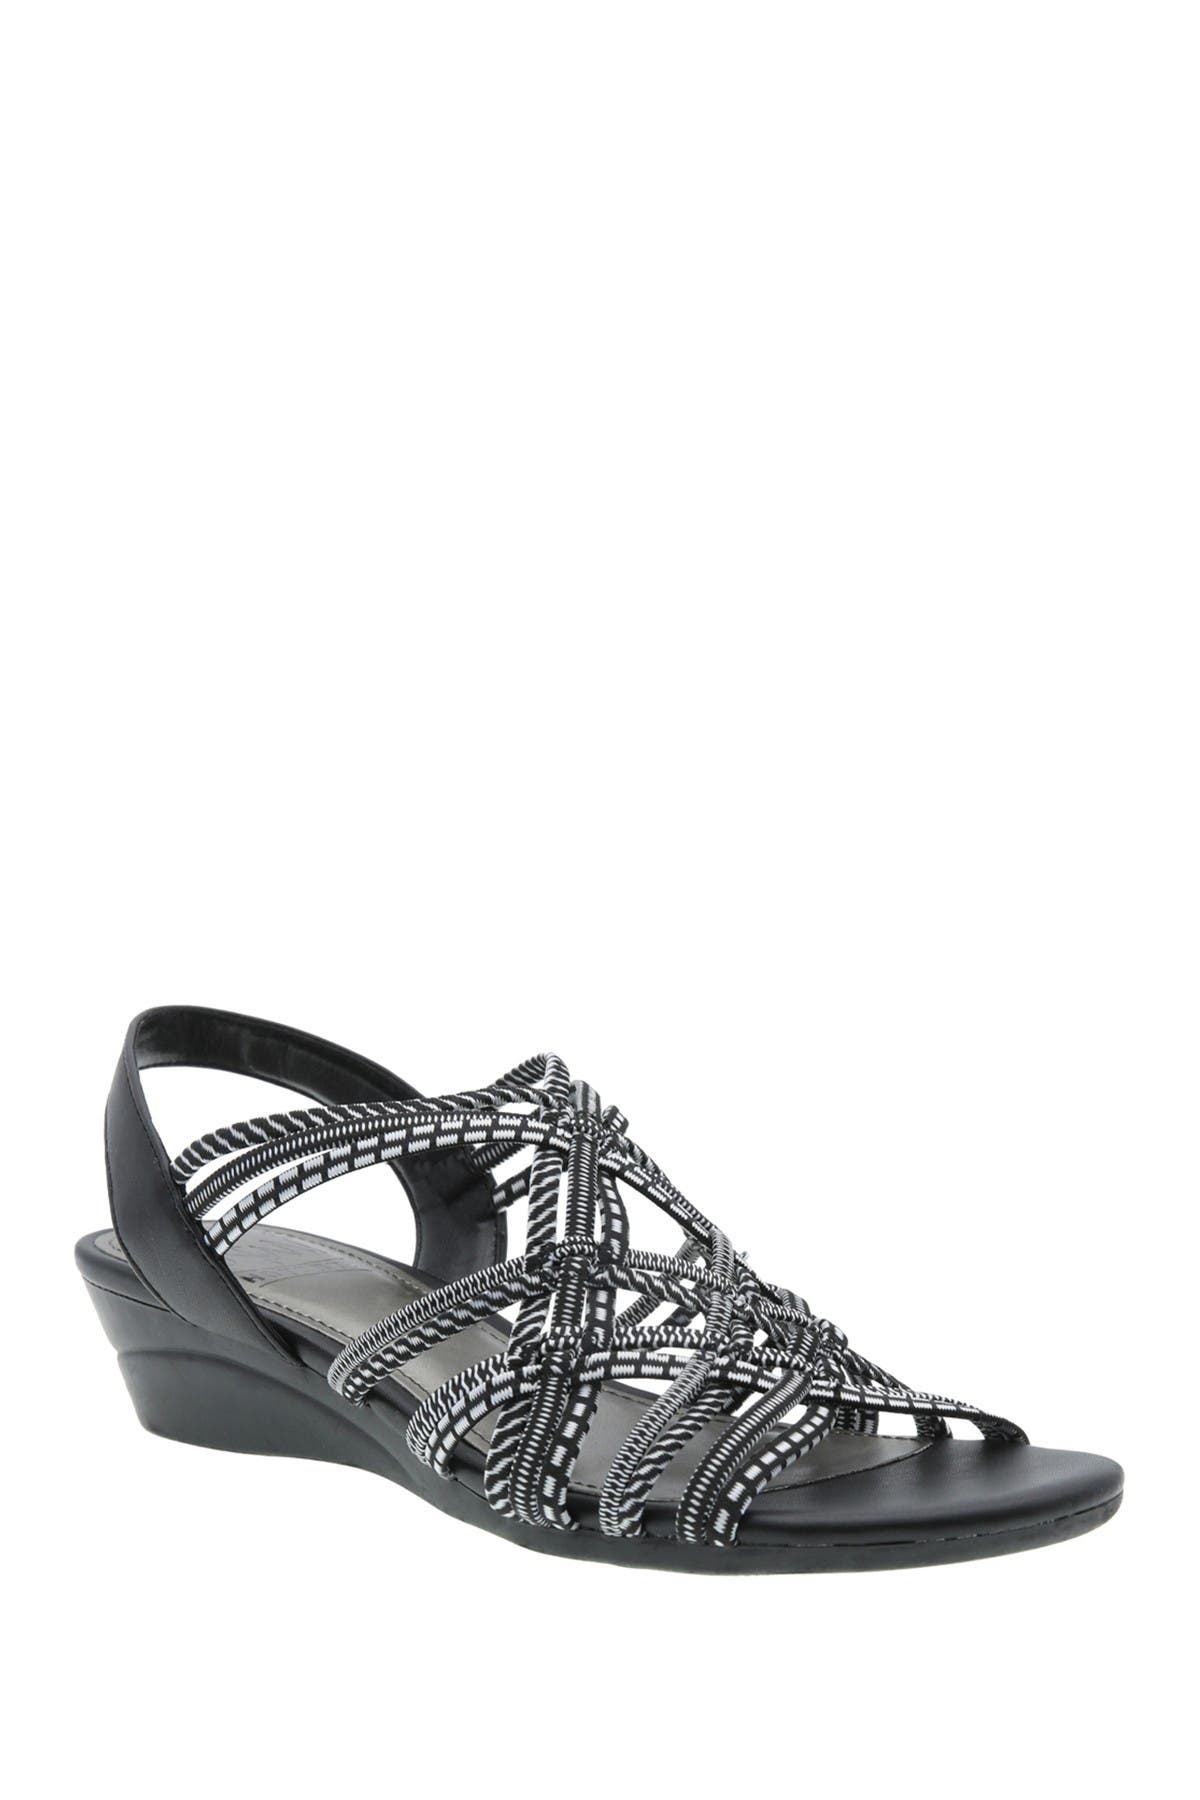 Impo Rainelle Stretch Wedge Sandal In Black/whit